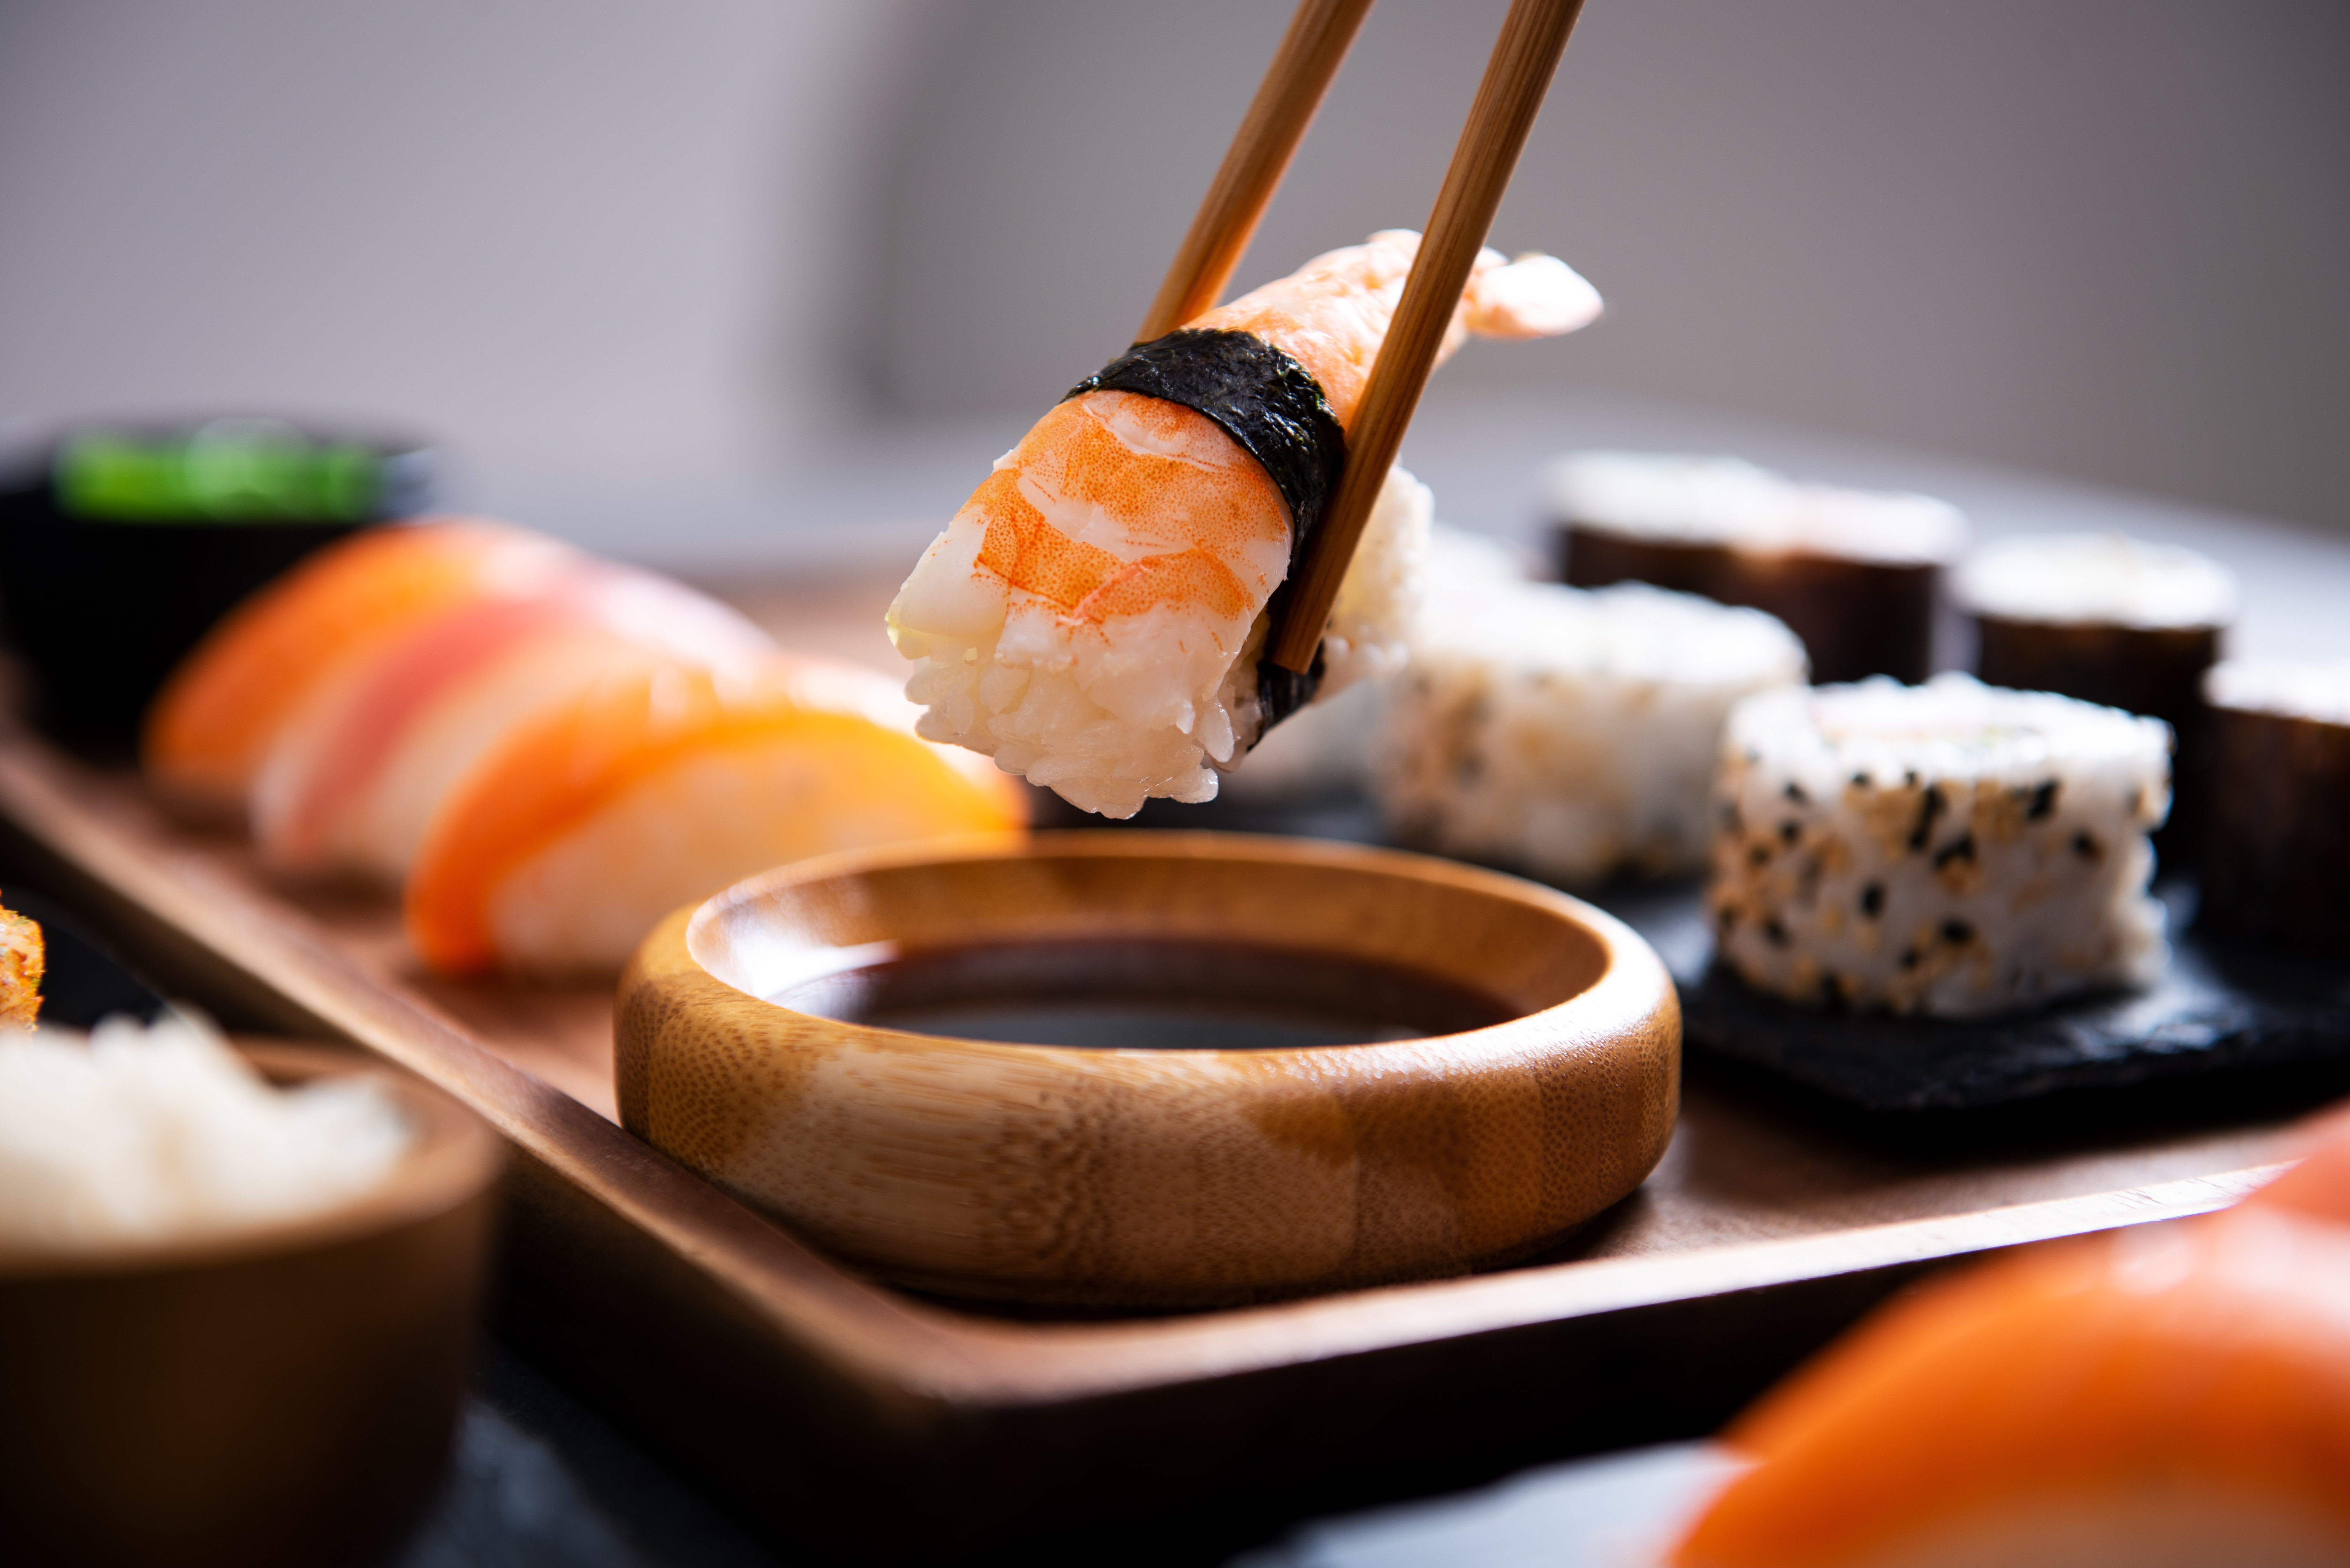 How healthy is your sushi meal? And can eating sushi be harmful? Photo: Getty Images